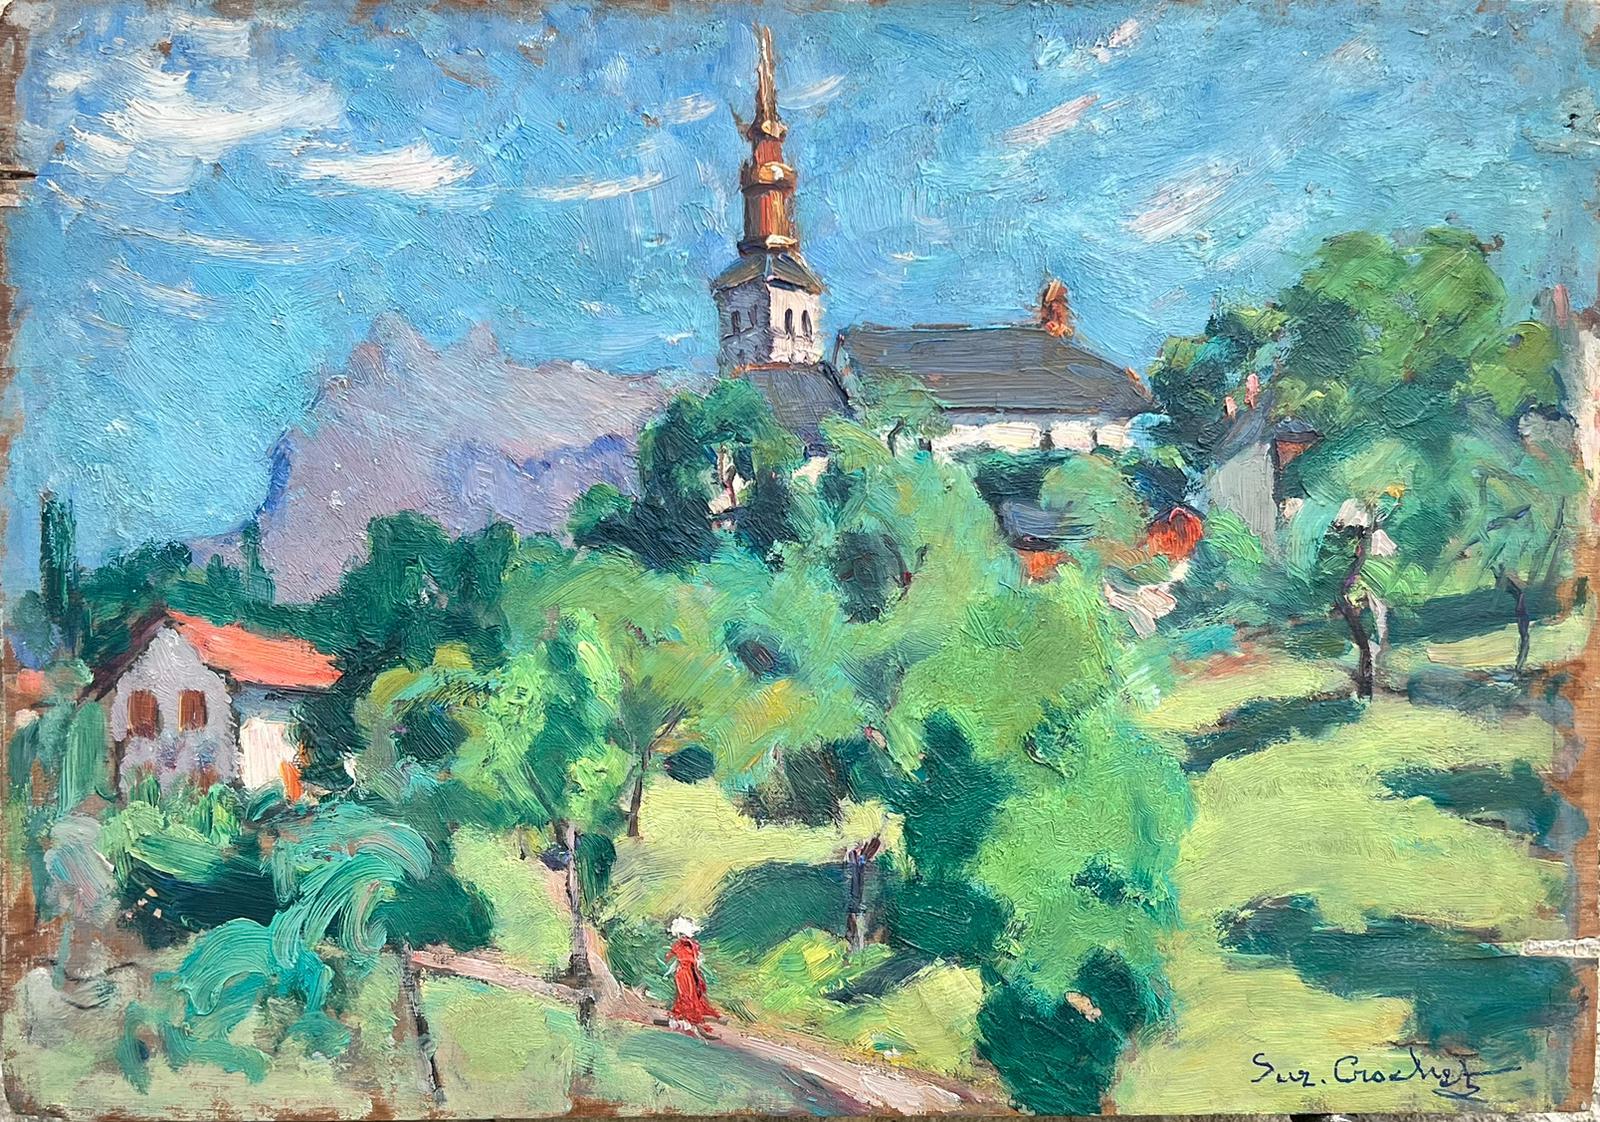 Suzanne Crochet Landscape Painting - 1930's French Post Impressionist Oil Painting Bright Green Church Landscape